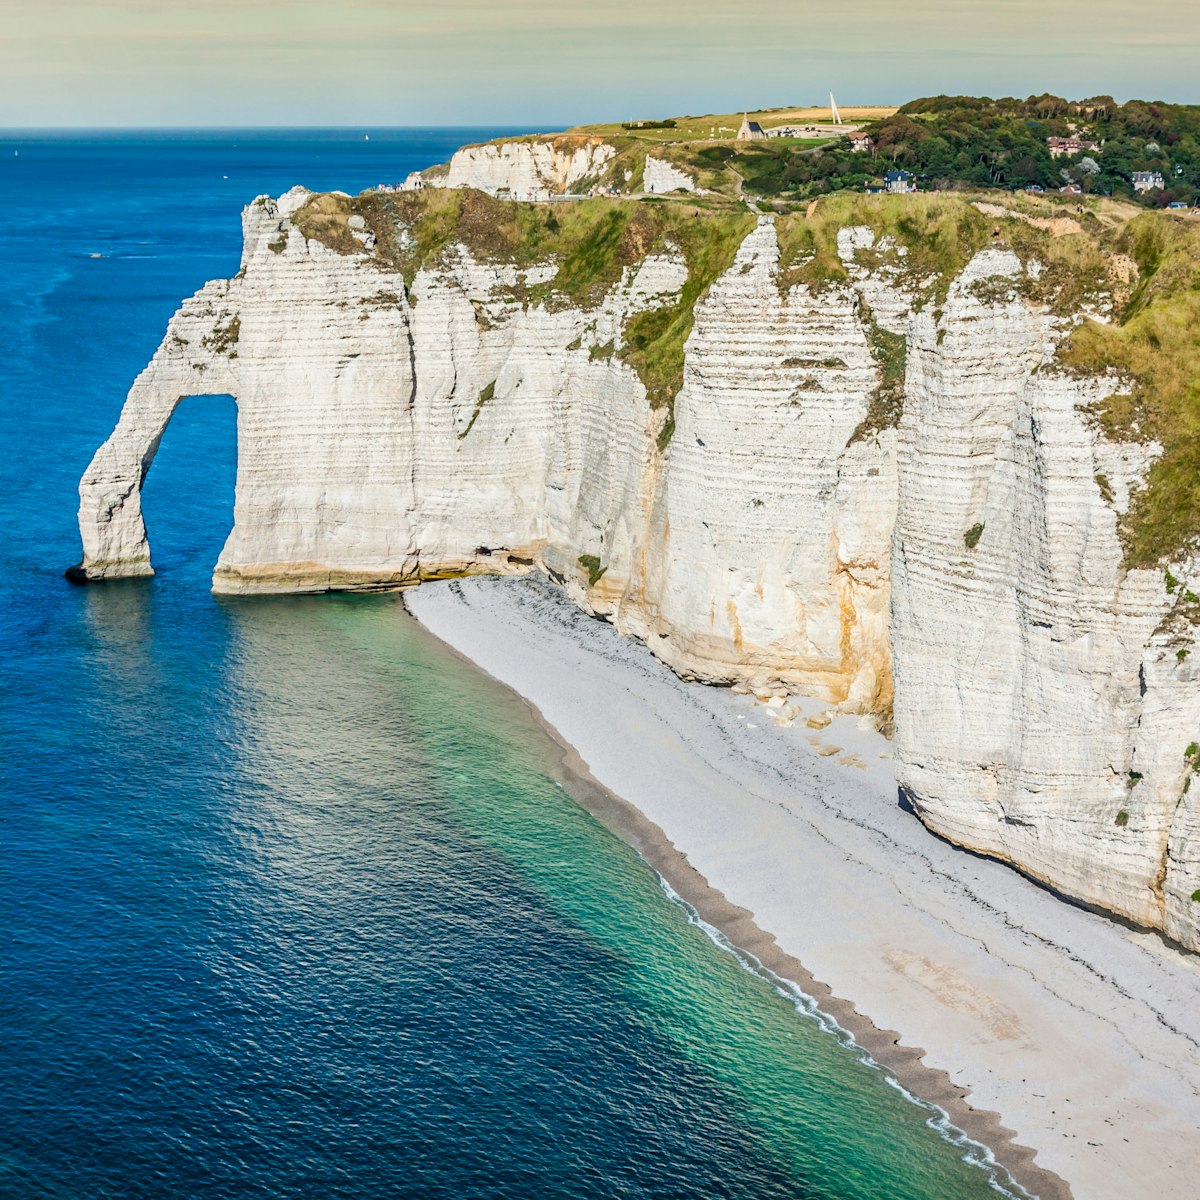 Falaise d’Aval, the famous white cliffs at Etretat in Normandy.